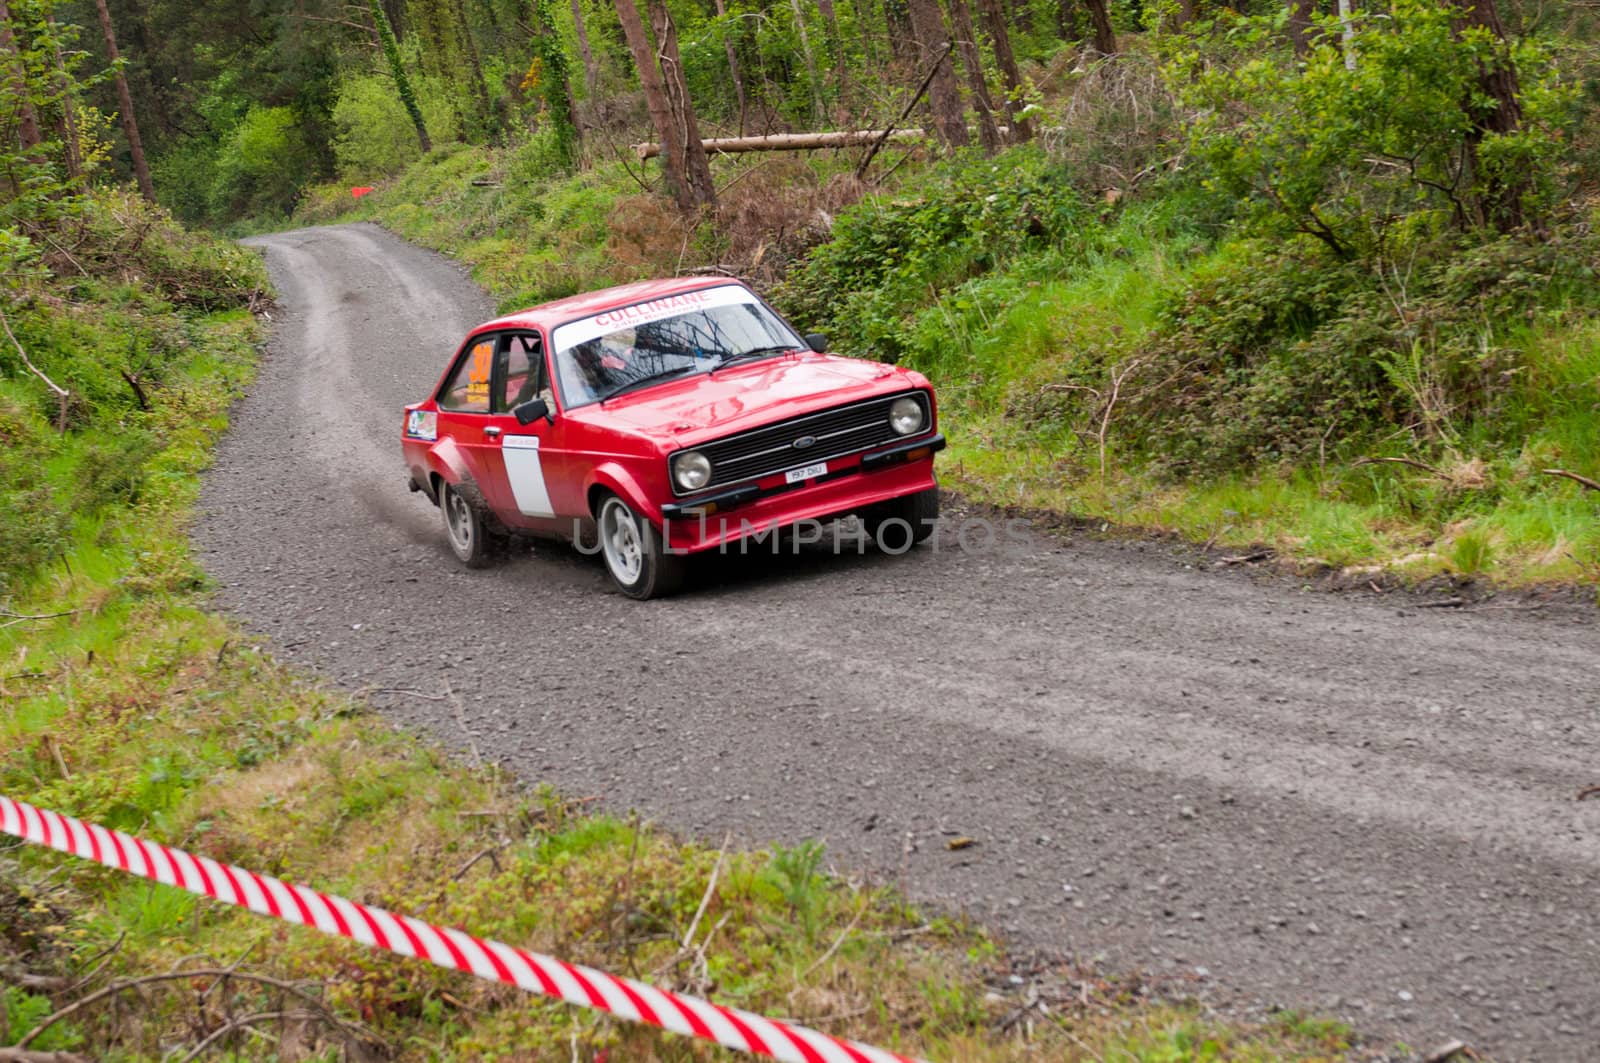 J. Cullinane driving Ford Escort by luissantos84